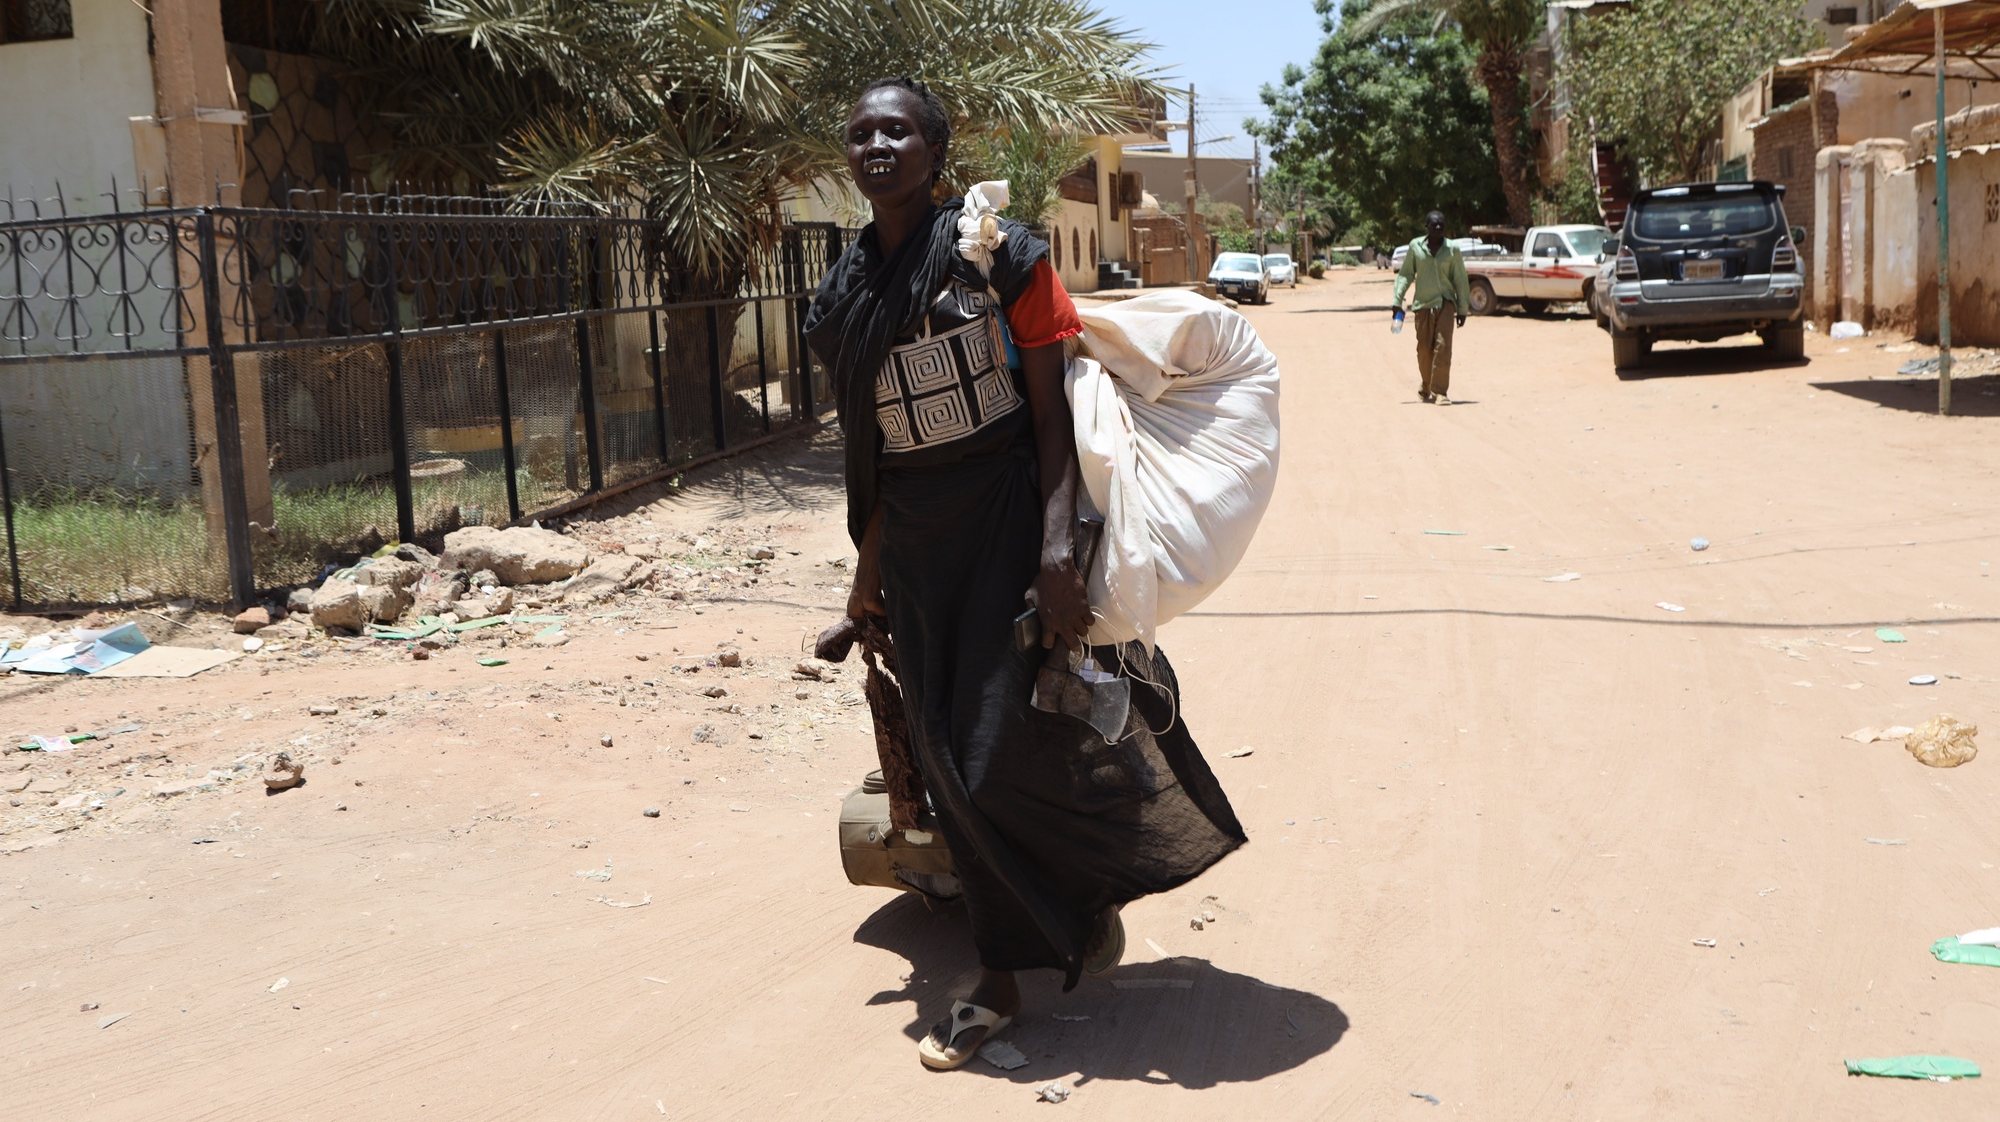 epa10579958 A Sudanese woman carries her belongings on a street in Khartoum, Sudan, 19 April 2023. A power struggle erupted since 15 April between the Sudanese army led by army Chief General Abdel Fattah al-Burhan and the paramilitaries of the Rapid Support Forces (RSF) led by General Mohamed Hamdan Dagalo, resulting in at least 200 deaths according to doctors&#039; association in Sudan.  EPA/STRINGER